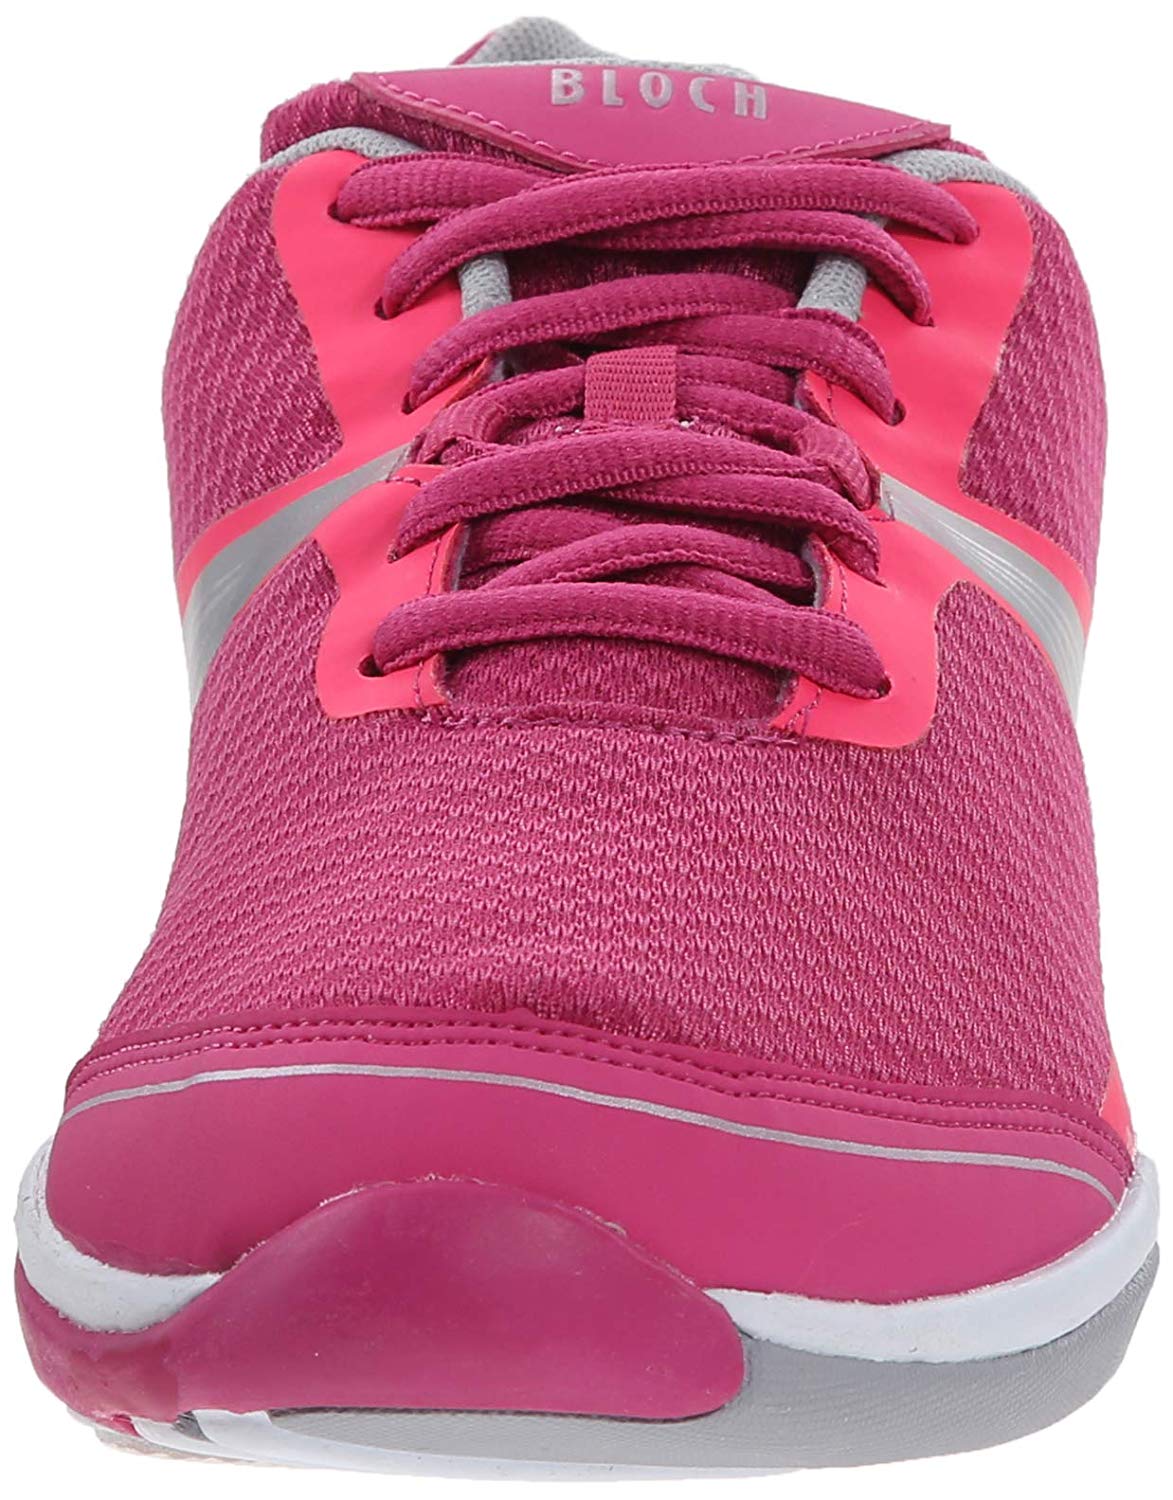 Bloch Womens Element Low Top Lace Up Running Sneaker, Pink, Size 7.0 ...